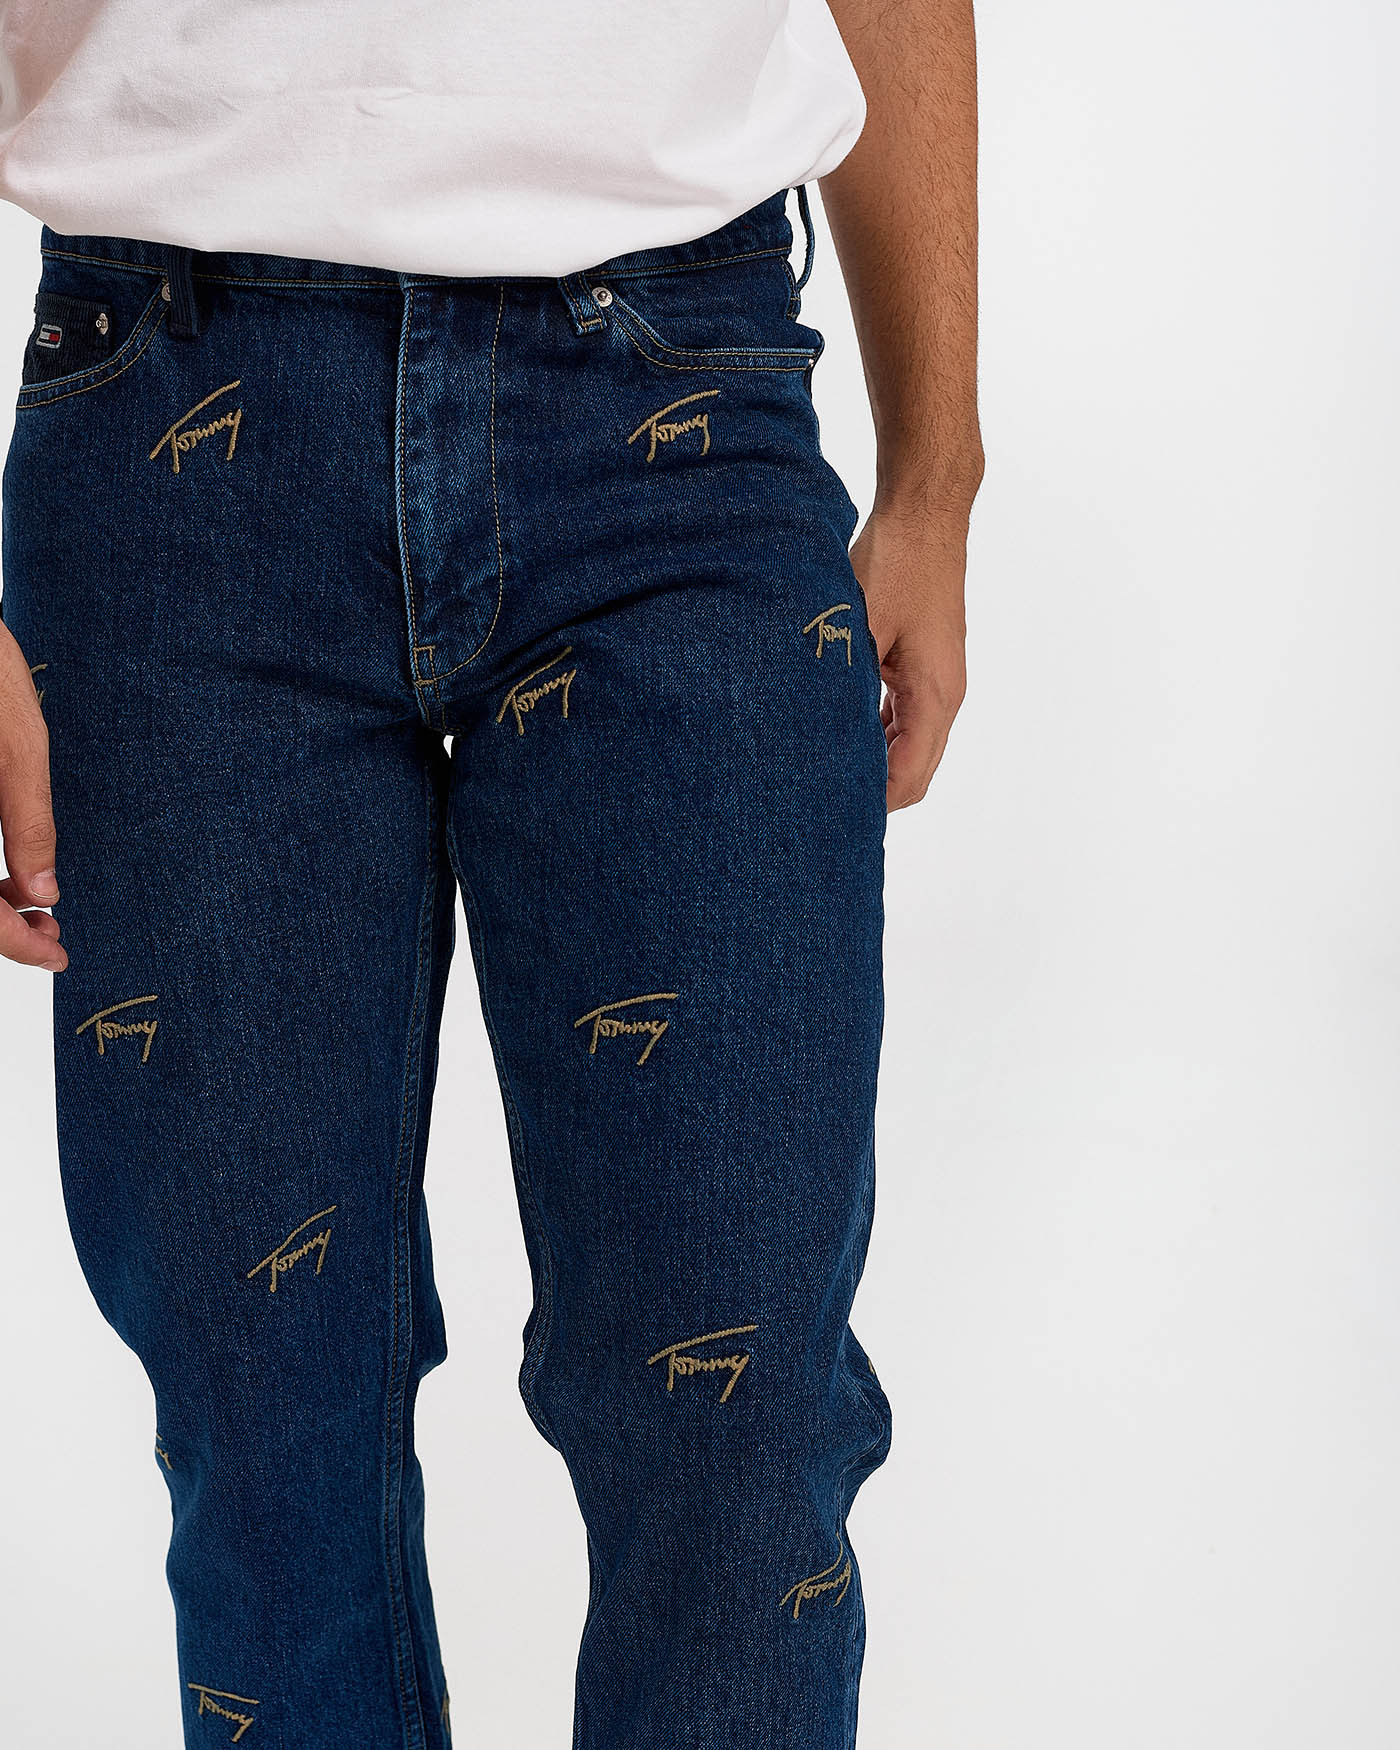 TAPERED JEANS EMBROIDERY - DAD DM0DM11501 LOGO TOMMY HILFIGER